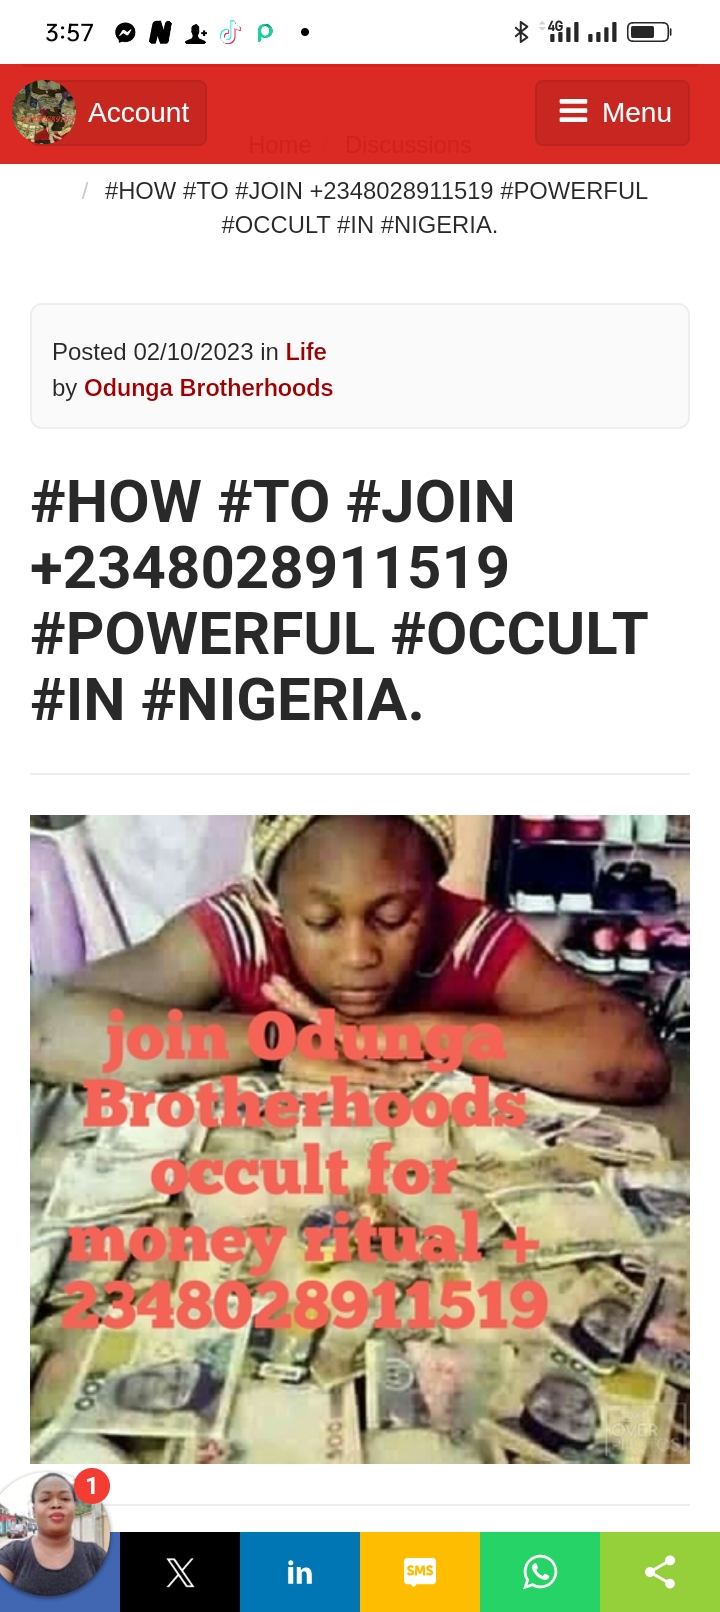 #OCCULT °°+2348028911519 [{{}}] CALL NOW OR WHATSAPP FOR POWERS WEAL,Enugu Nigeria ,Cars,Cars